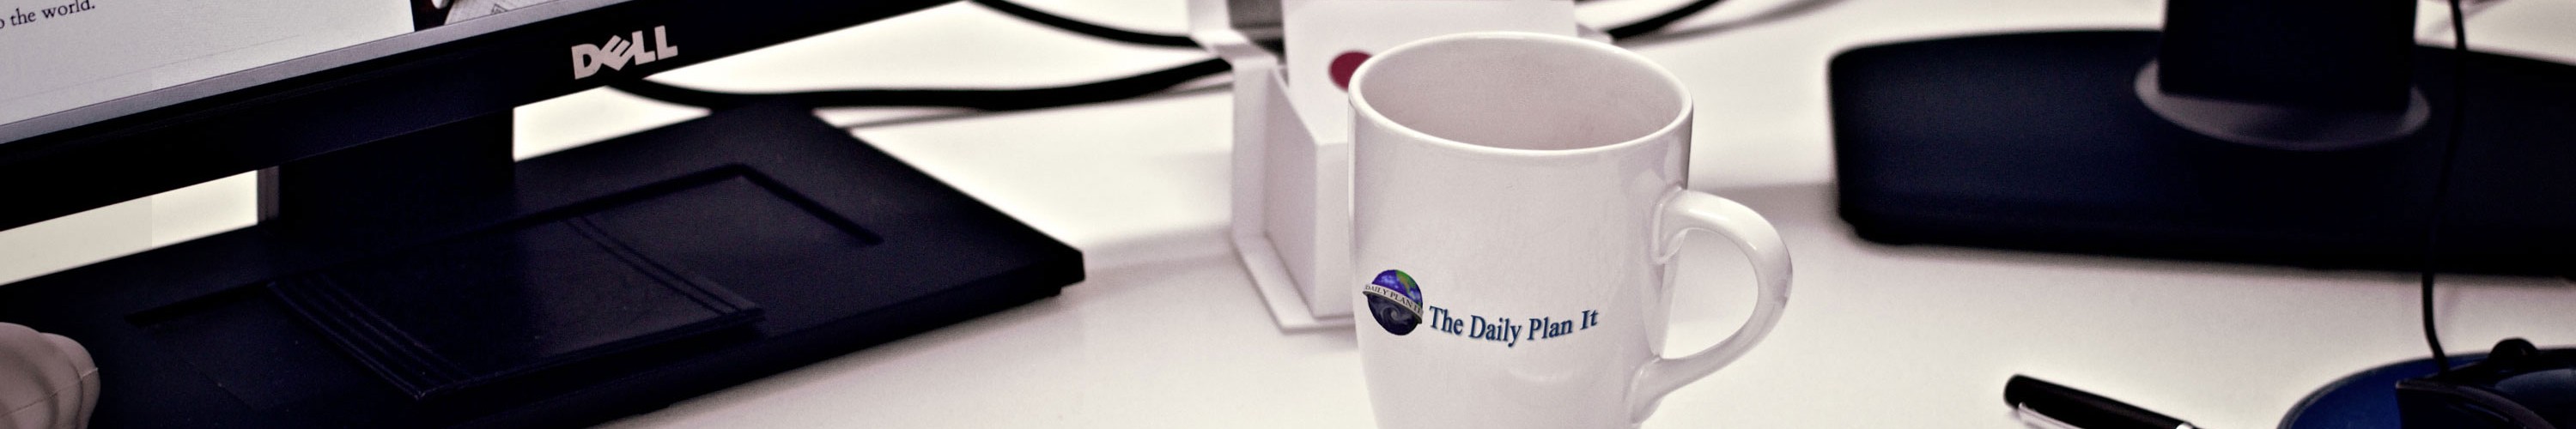 Daily Plan It - Where Your Business is The Center of Our Universe. Desk with coffee mug